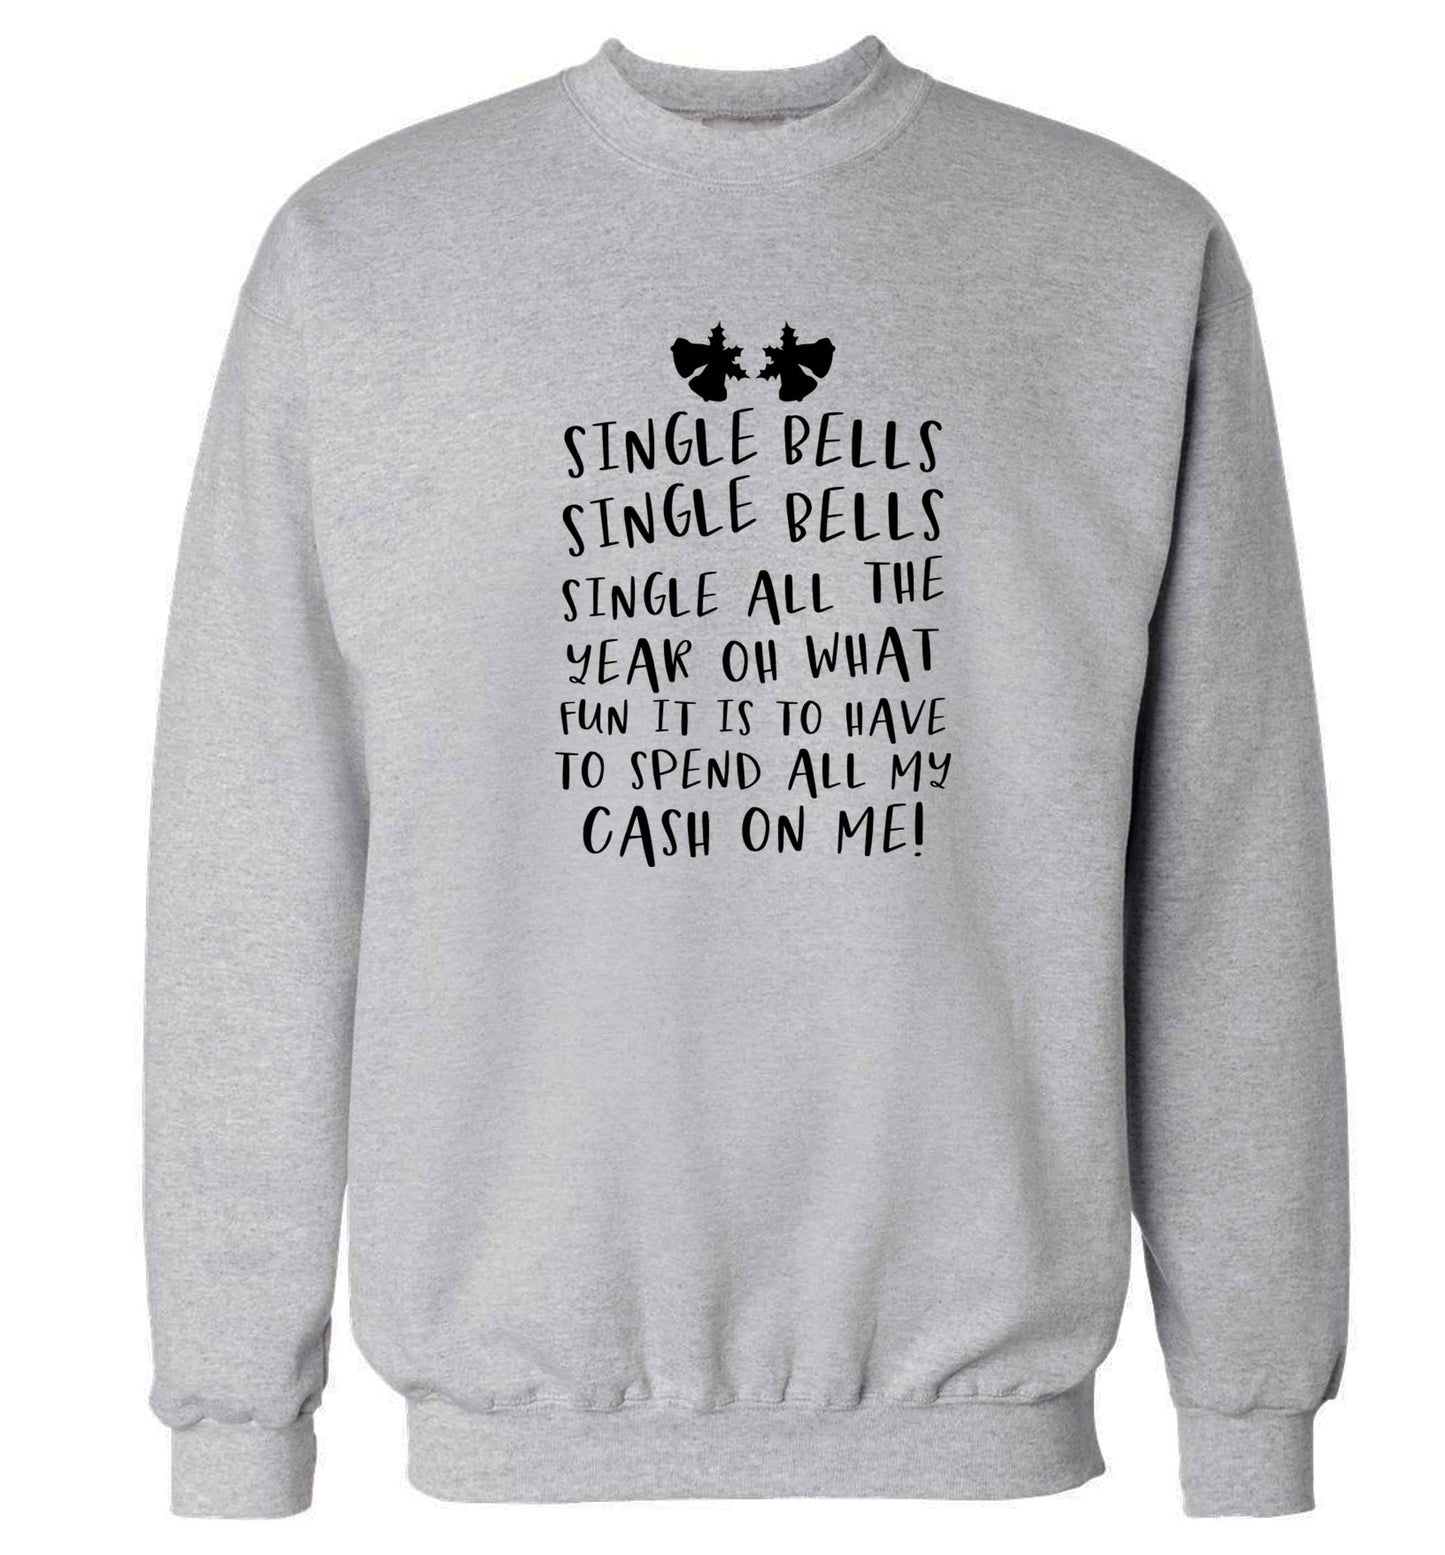 Single bells oh what fun it is to have to spend all my cash on me! Adult's unisex grey Sweater 2XL